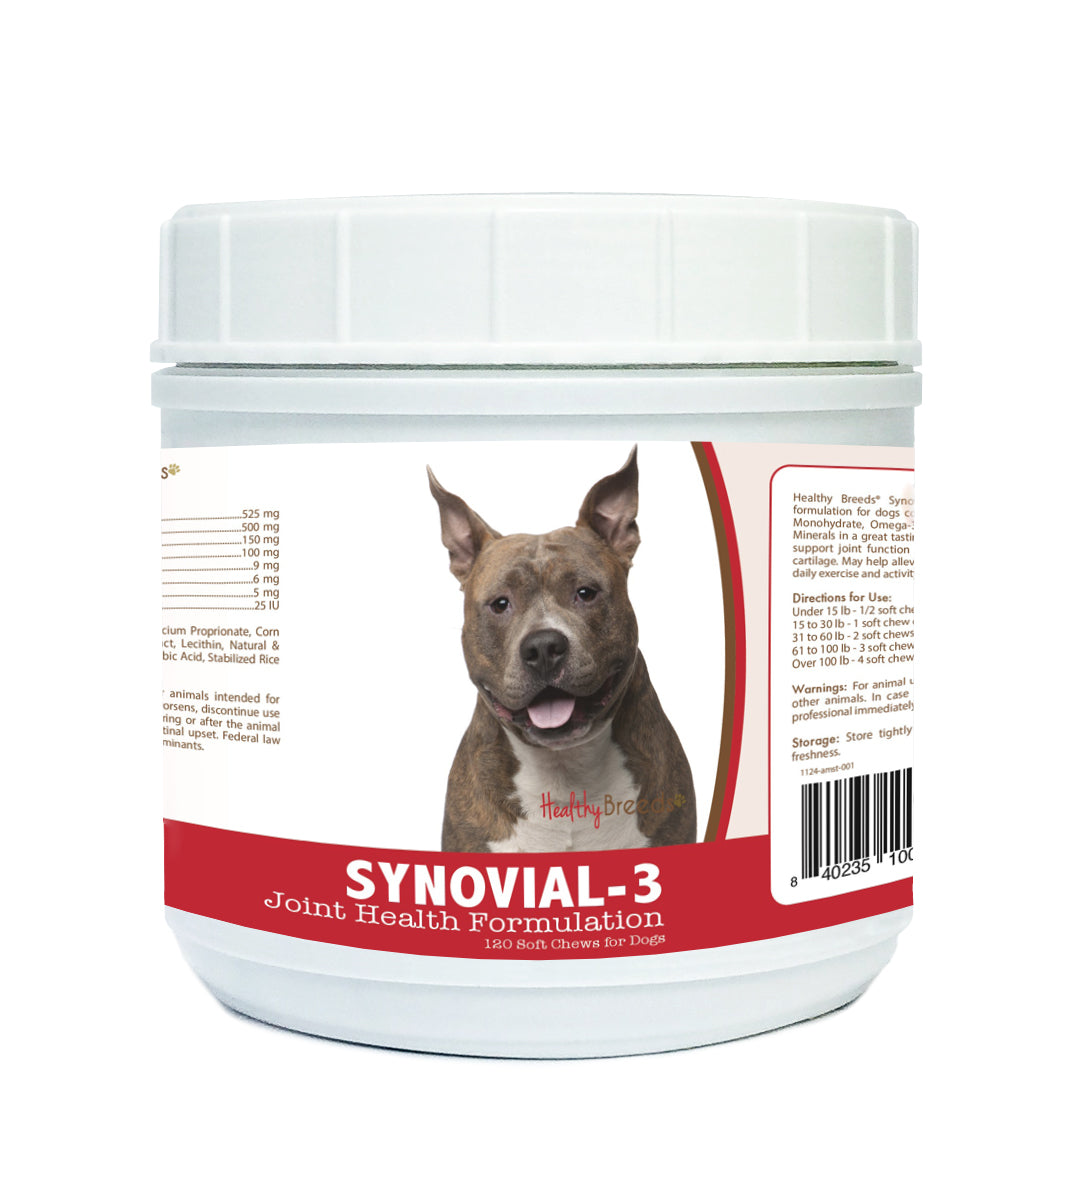 American Staffordshire Terrier Synovial-3 Joint Health Formulation Soft Chews 120 Coun